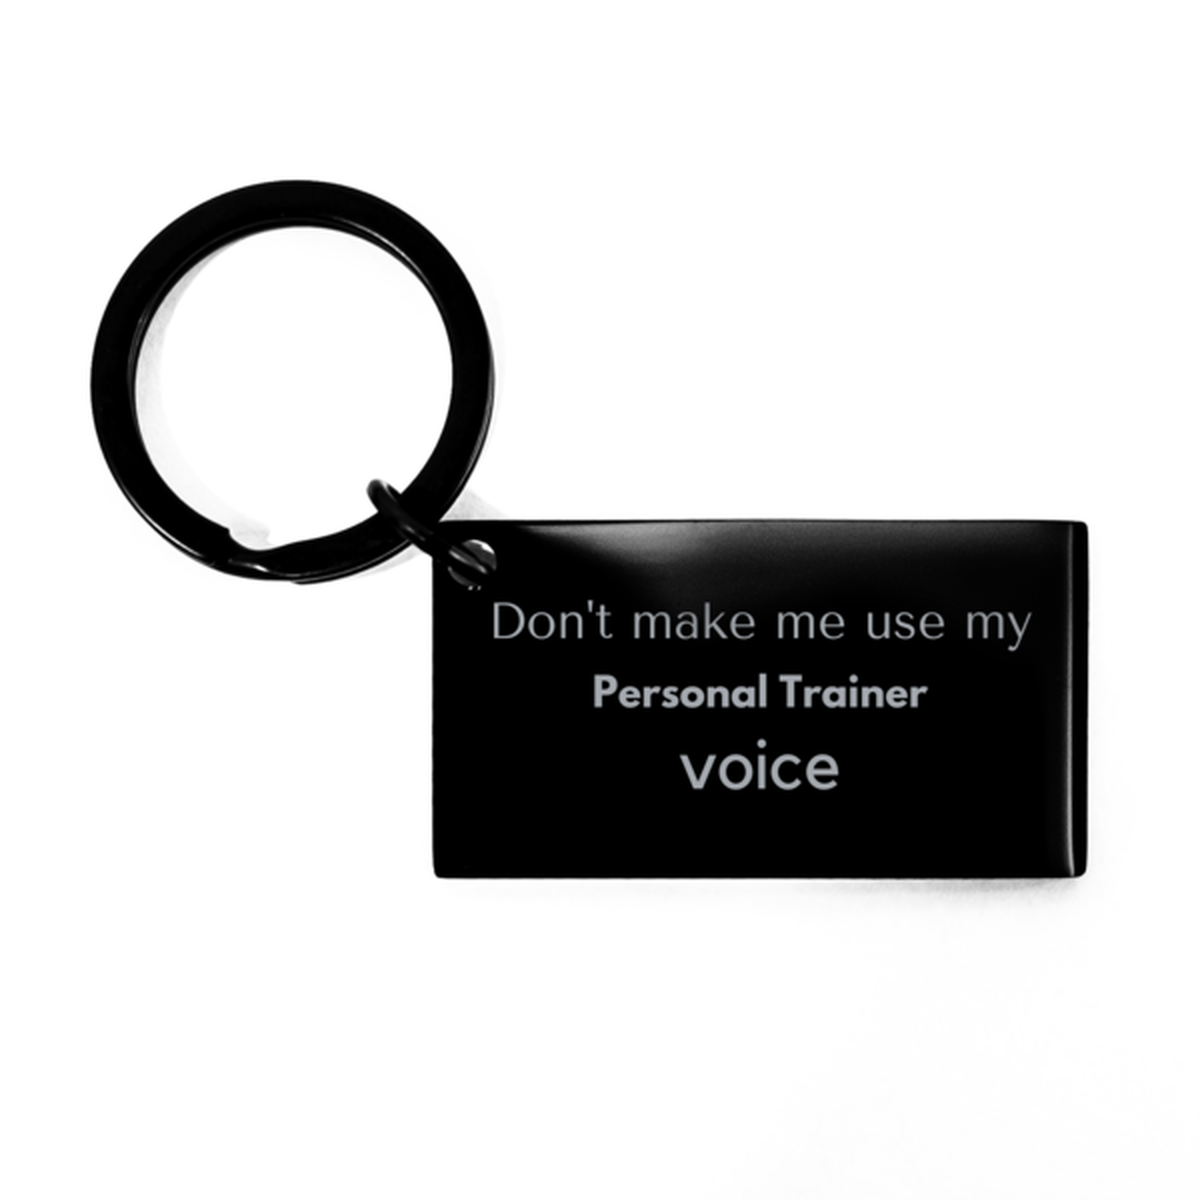 Don't make me use my Personal Trainer voice, Sarcasm Personal Trainer Gifts, Christmas Personal Trainer Keychain Birthday Unique Gifts For Personal Trainer Coworkers, Men, Women, Colleague, Friends